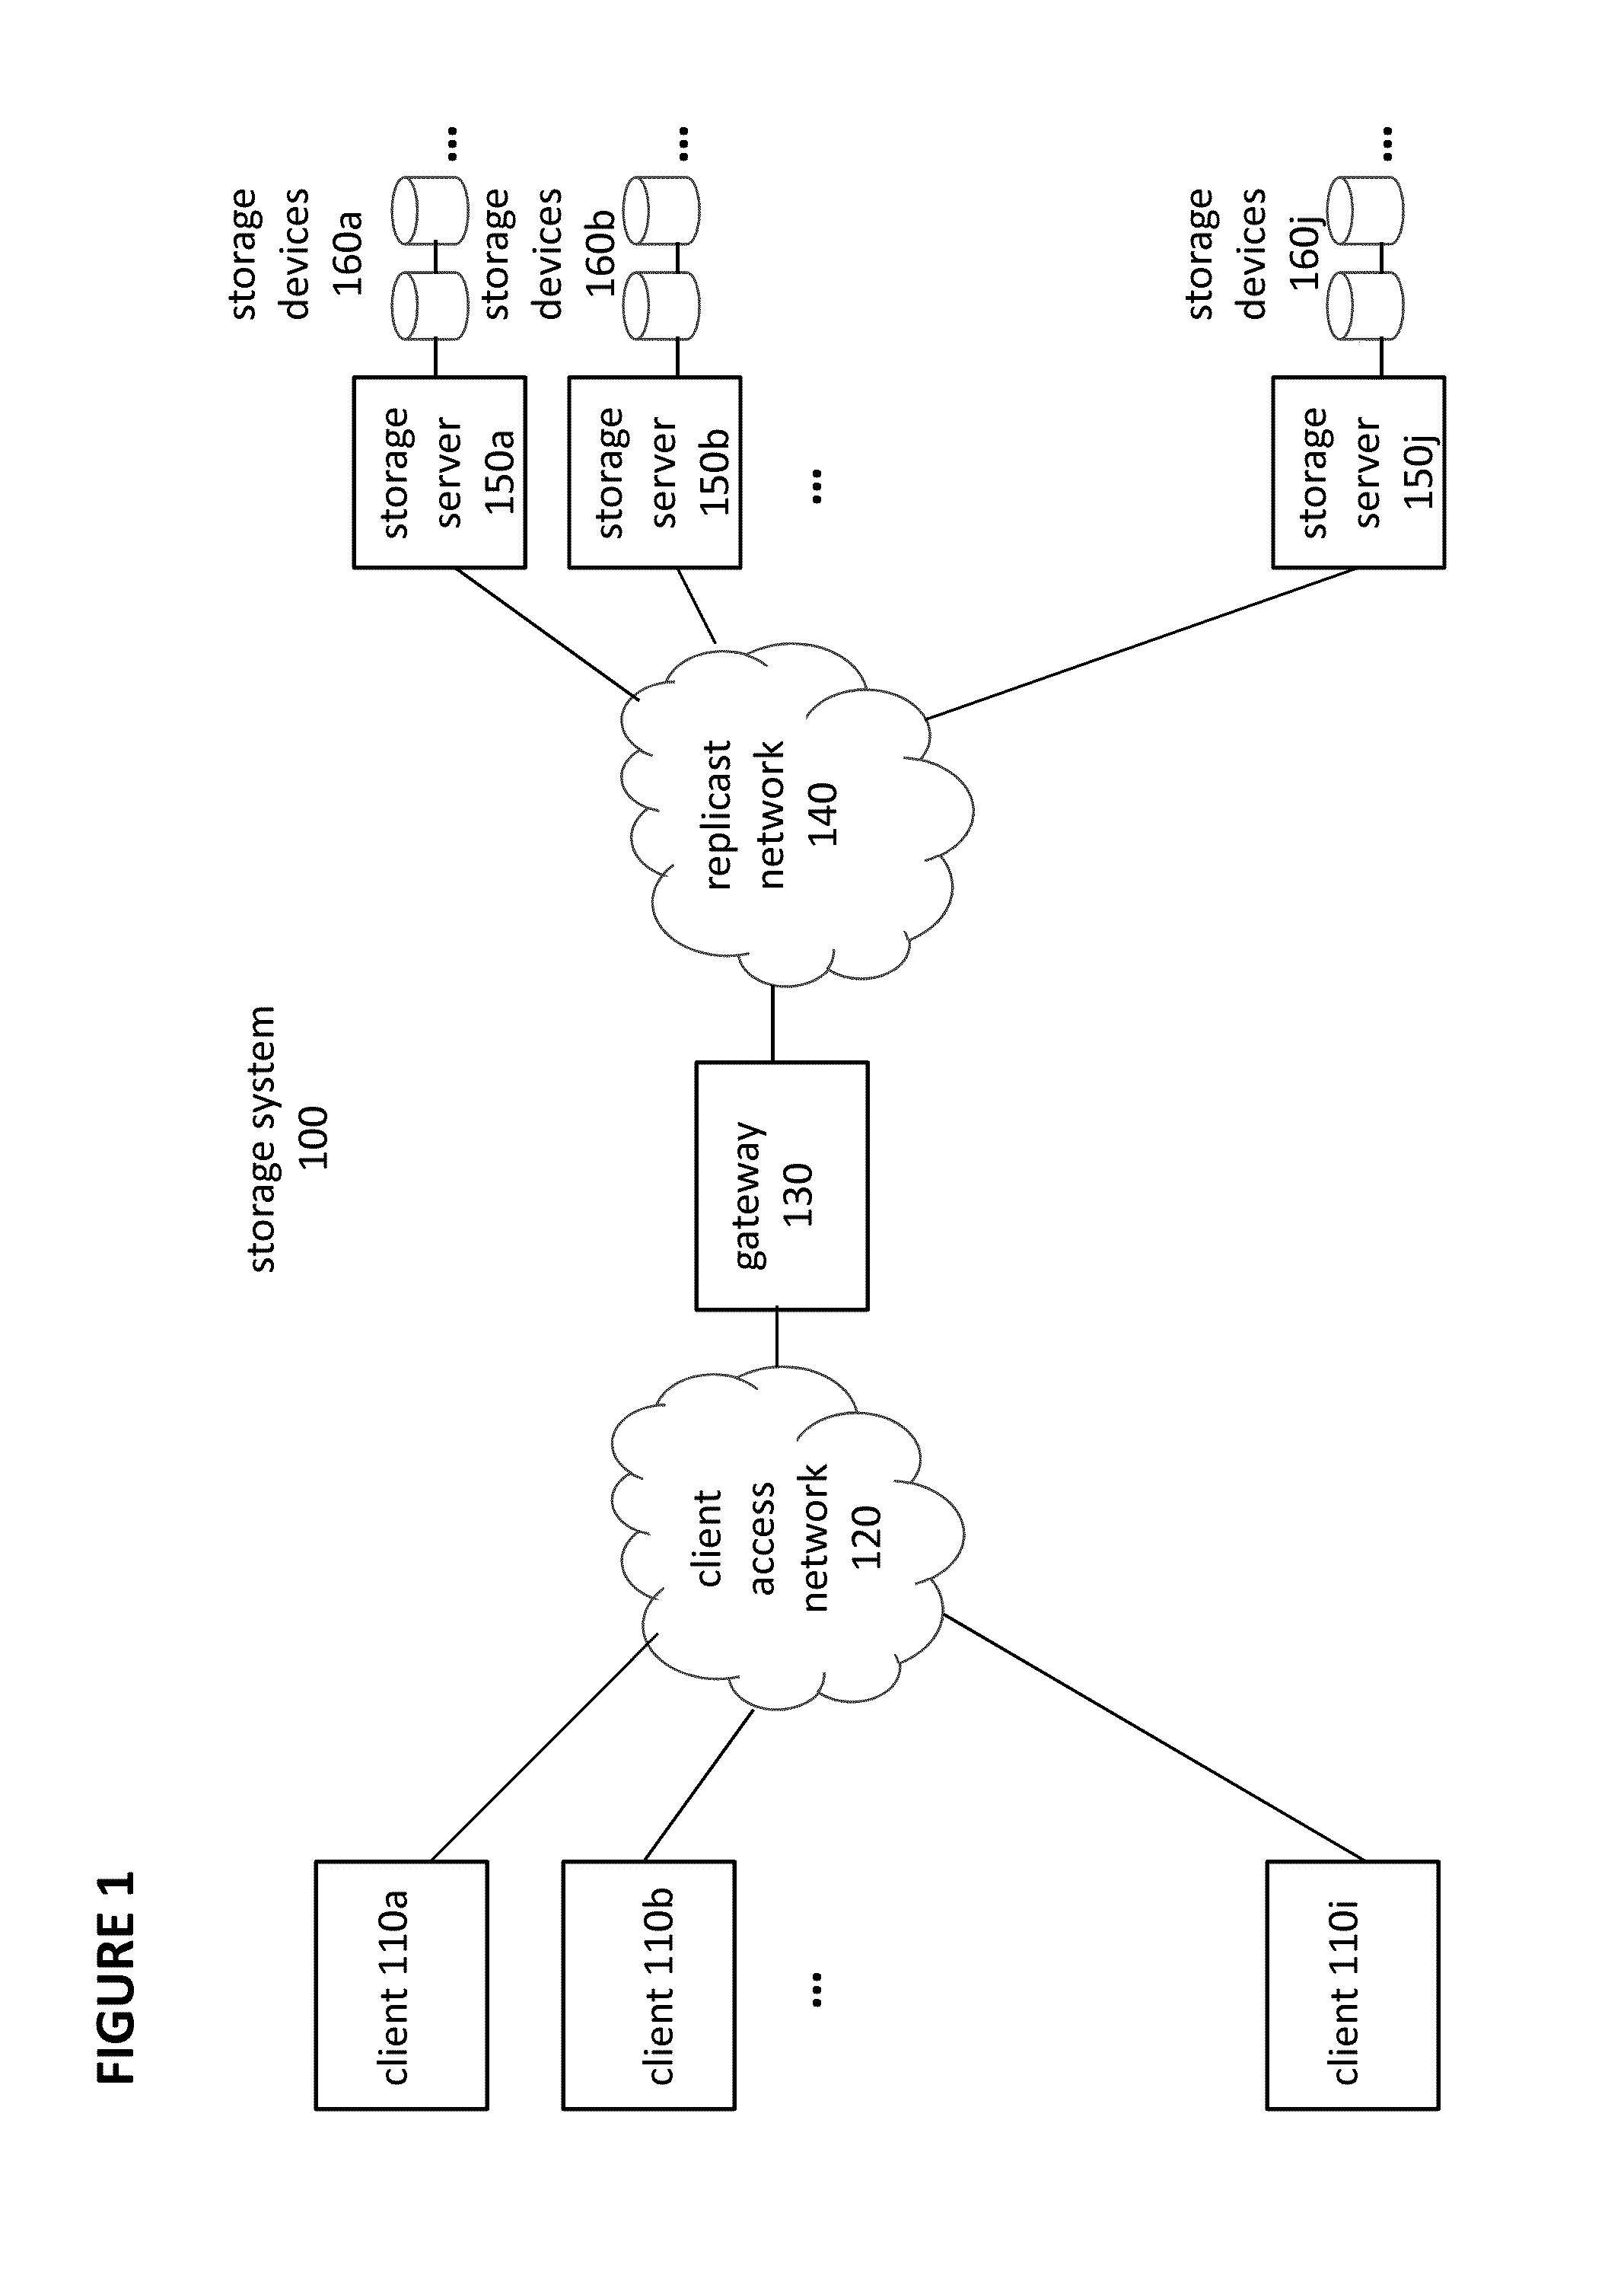 Object Storage System with Local Transaction Logs, a Distributed Namespace, and Optimized Support for User Directories